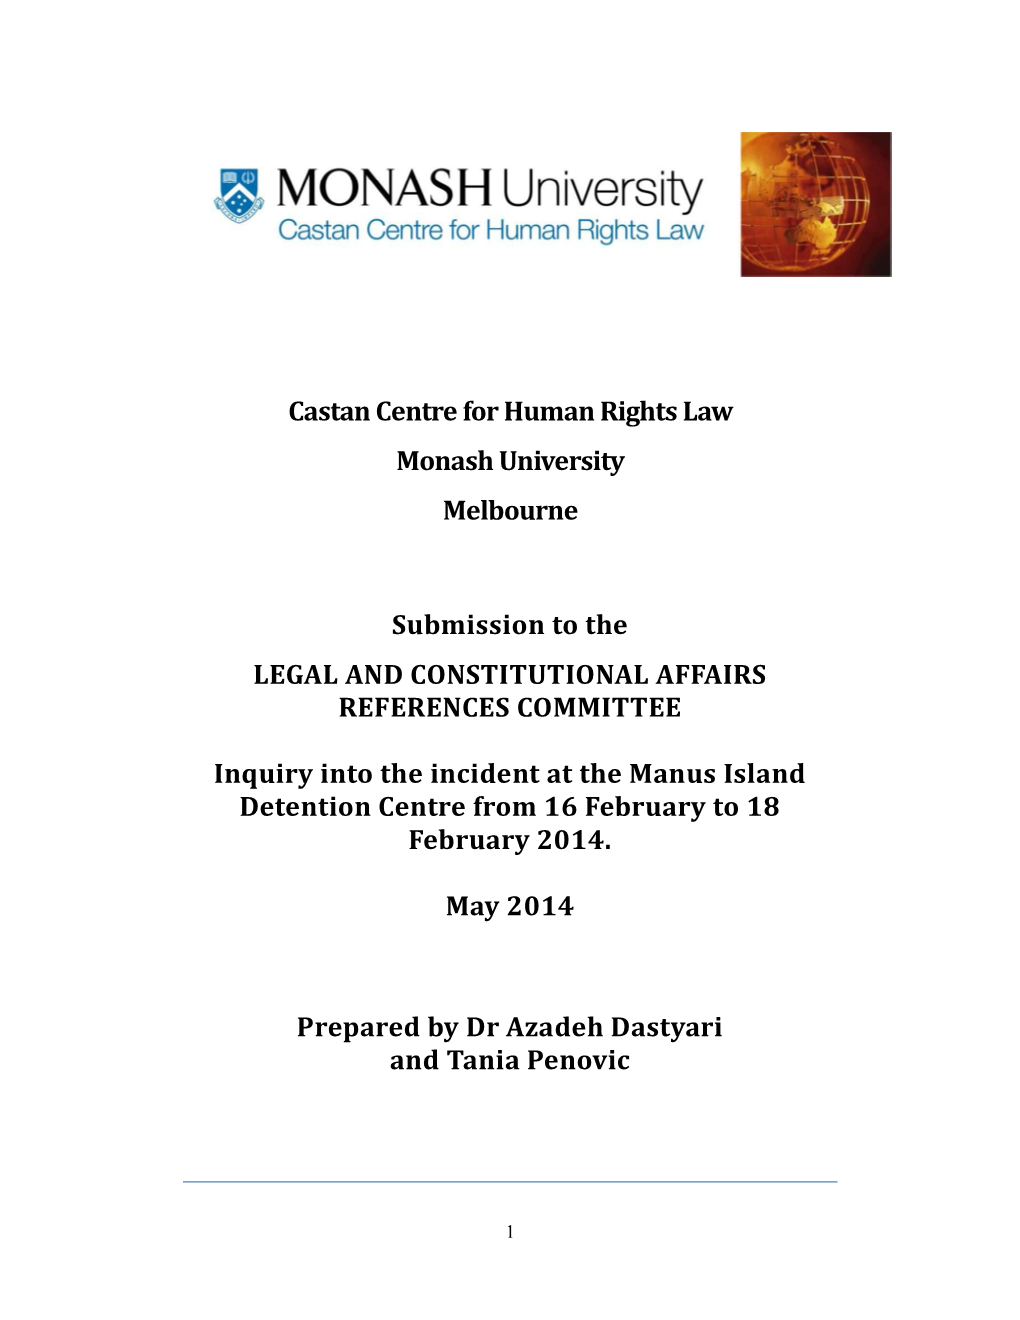 Inquiry Into the Incident at the Manus Island Detention Centre from 16 February to 18 February 2014